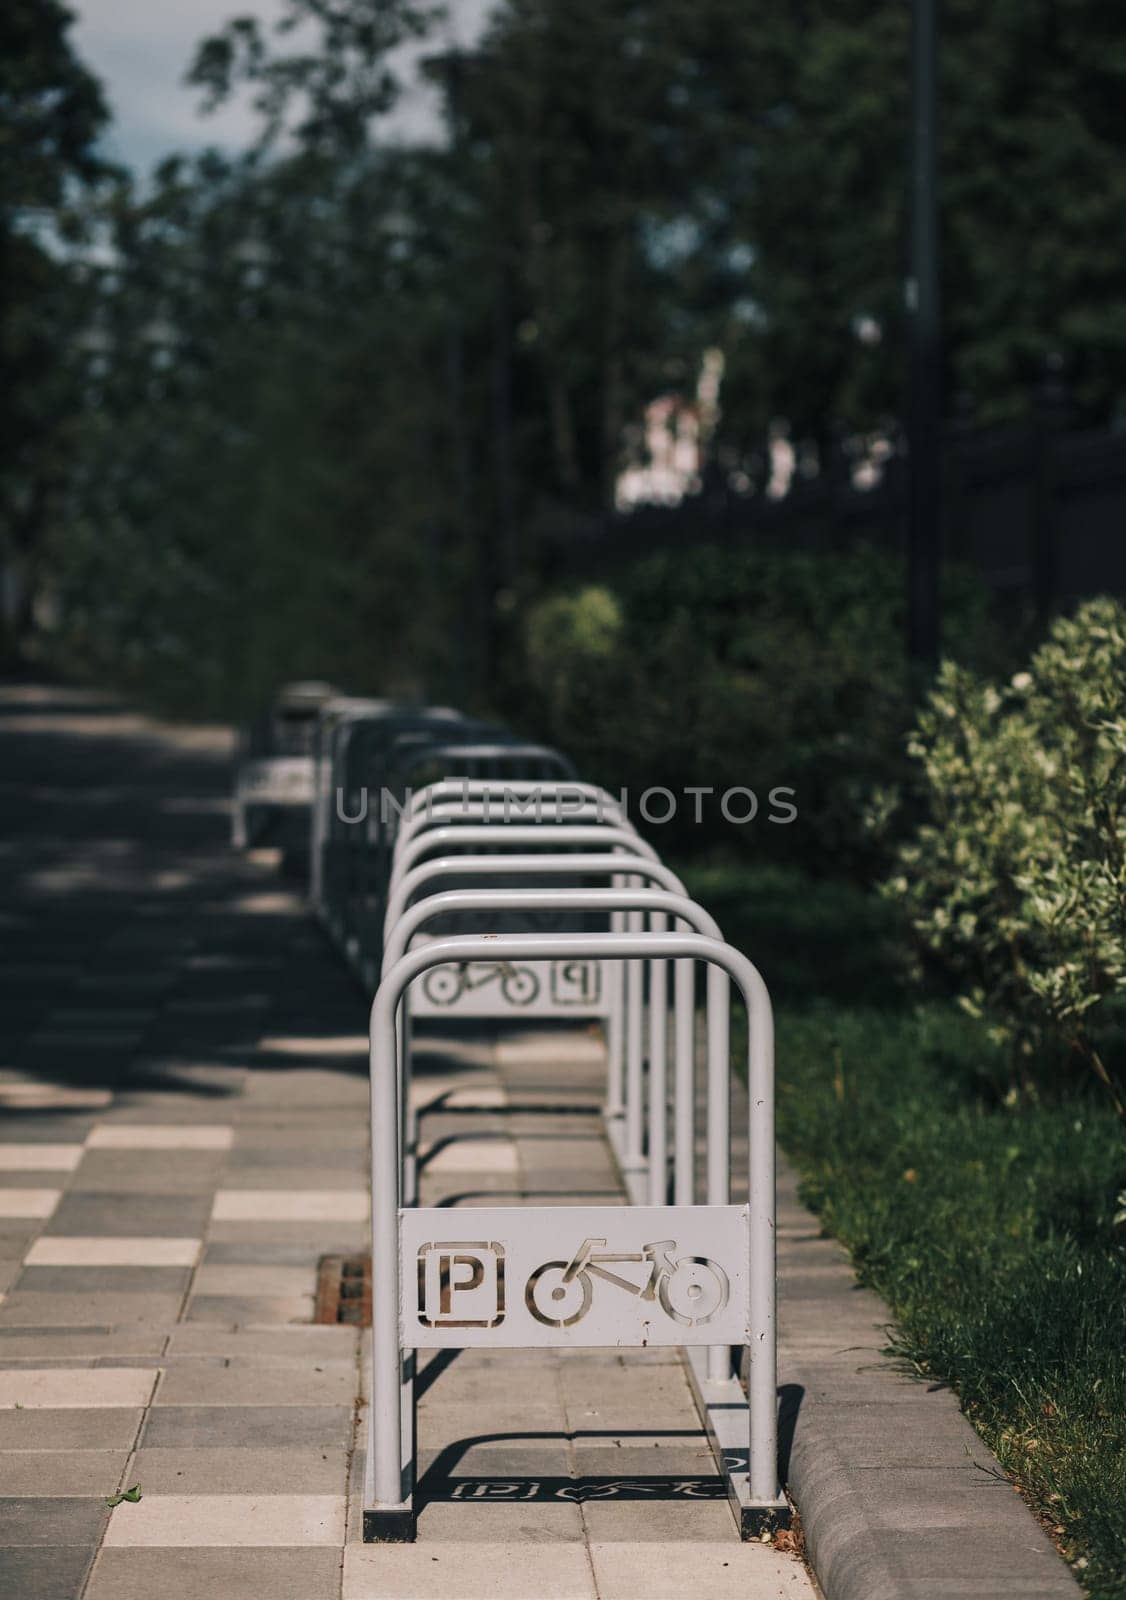 parking of bicycles by Ladouski